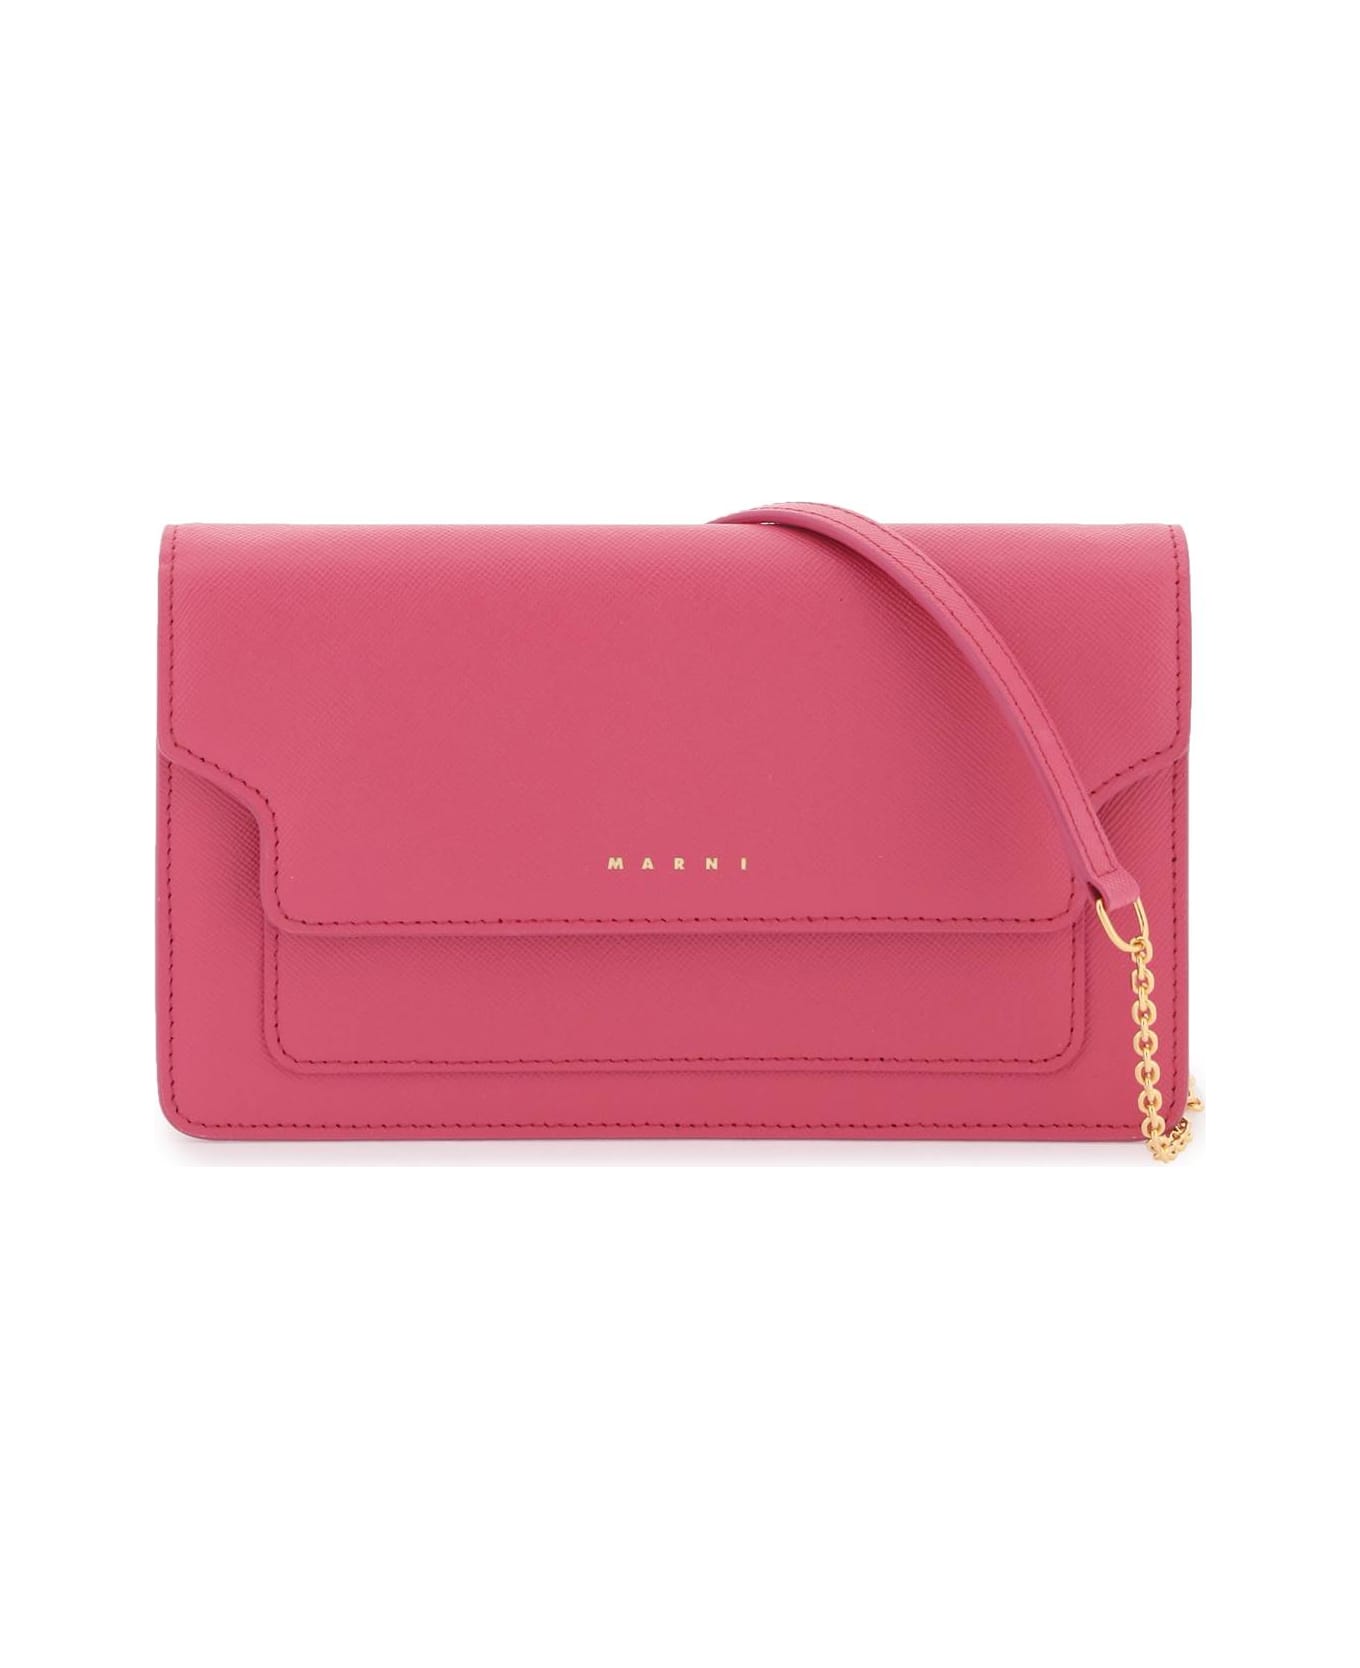 Marni Wallet With Shoulder Strap - LIGHT ORCHID (Pink) 財布